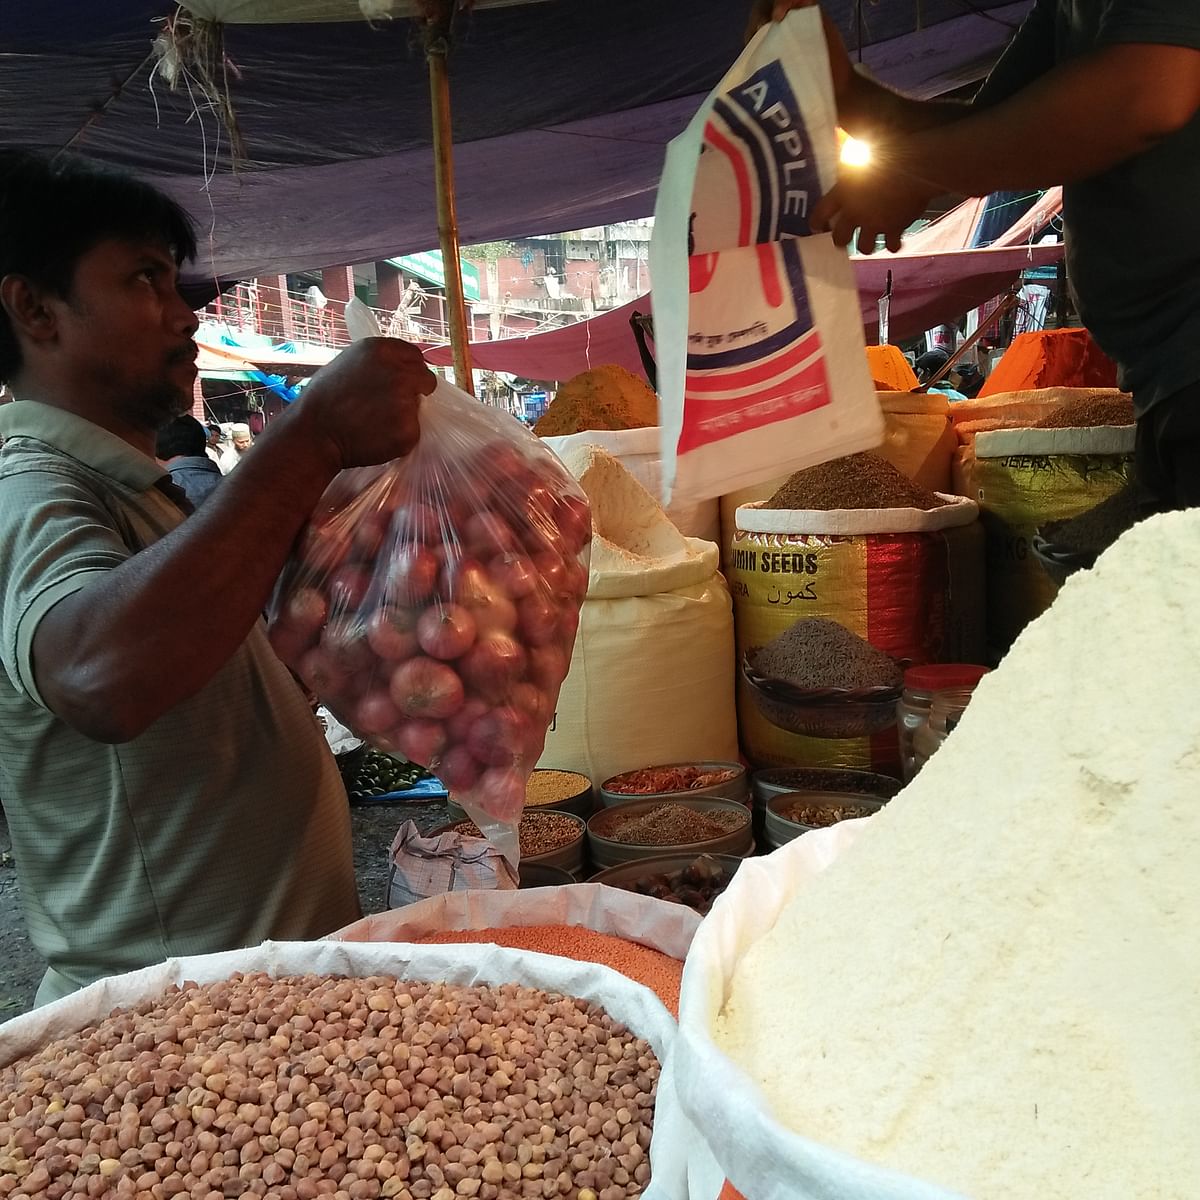 Abdur Rahim, 40, was buying ground spices from Karwan Bazar and was carrying a heavy bag of onions. Photo: Nusrat Nowrin